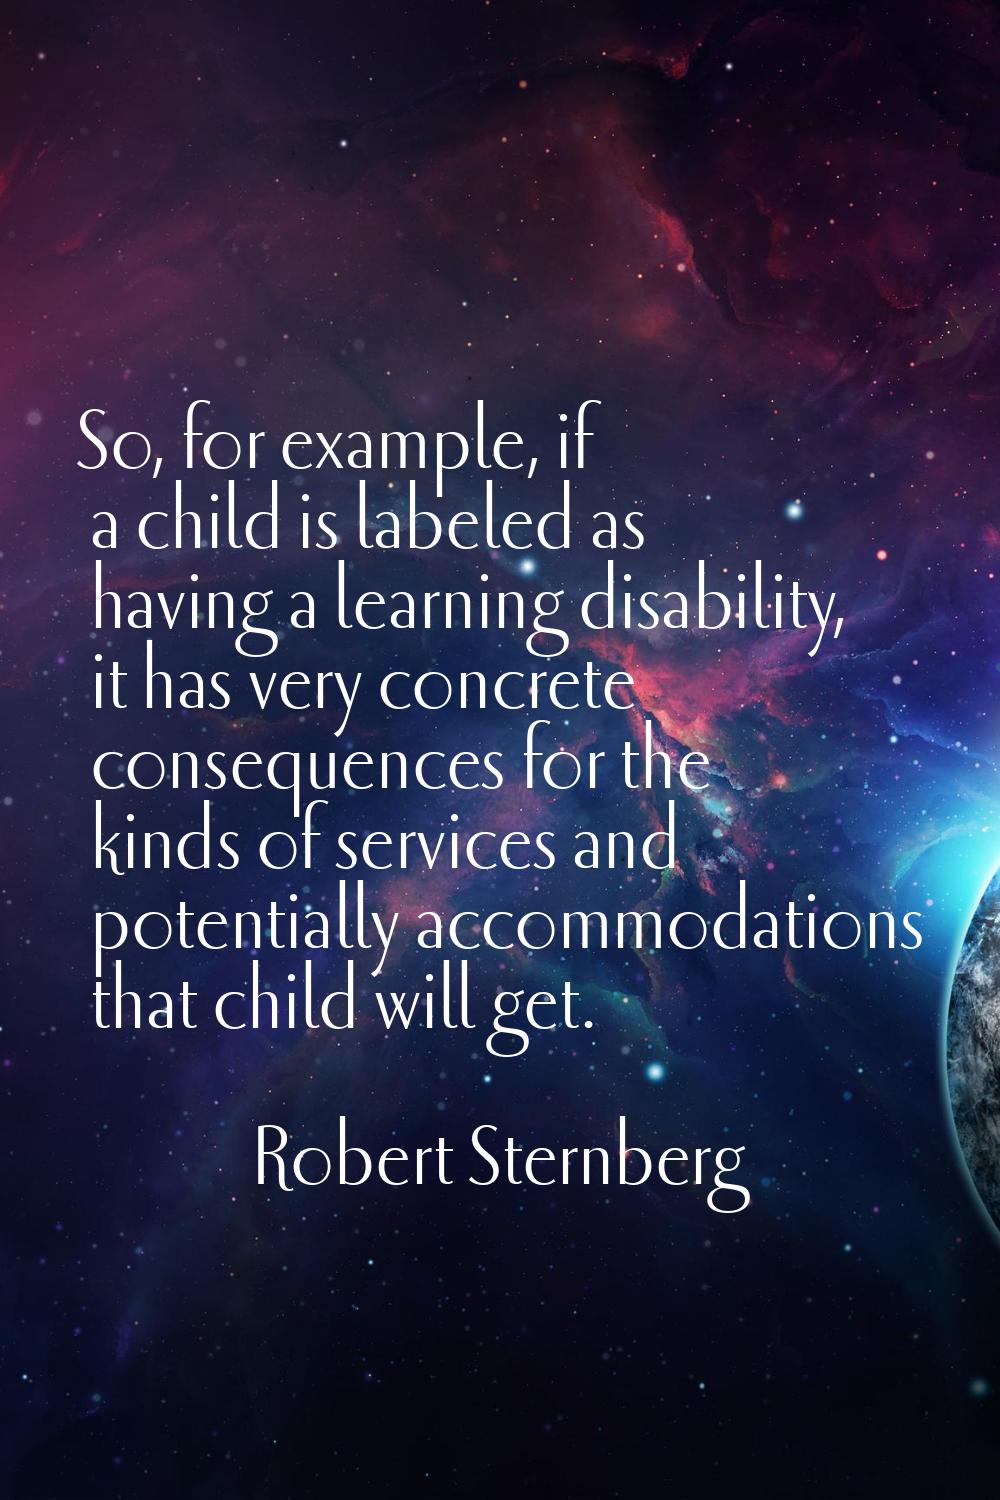 So, for example, if a child is labeled as having a learning disability, it has very concrete conseq